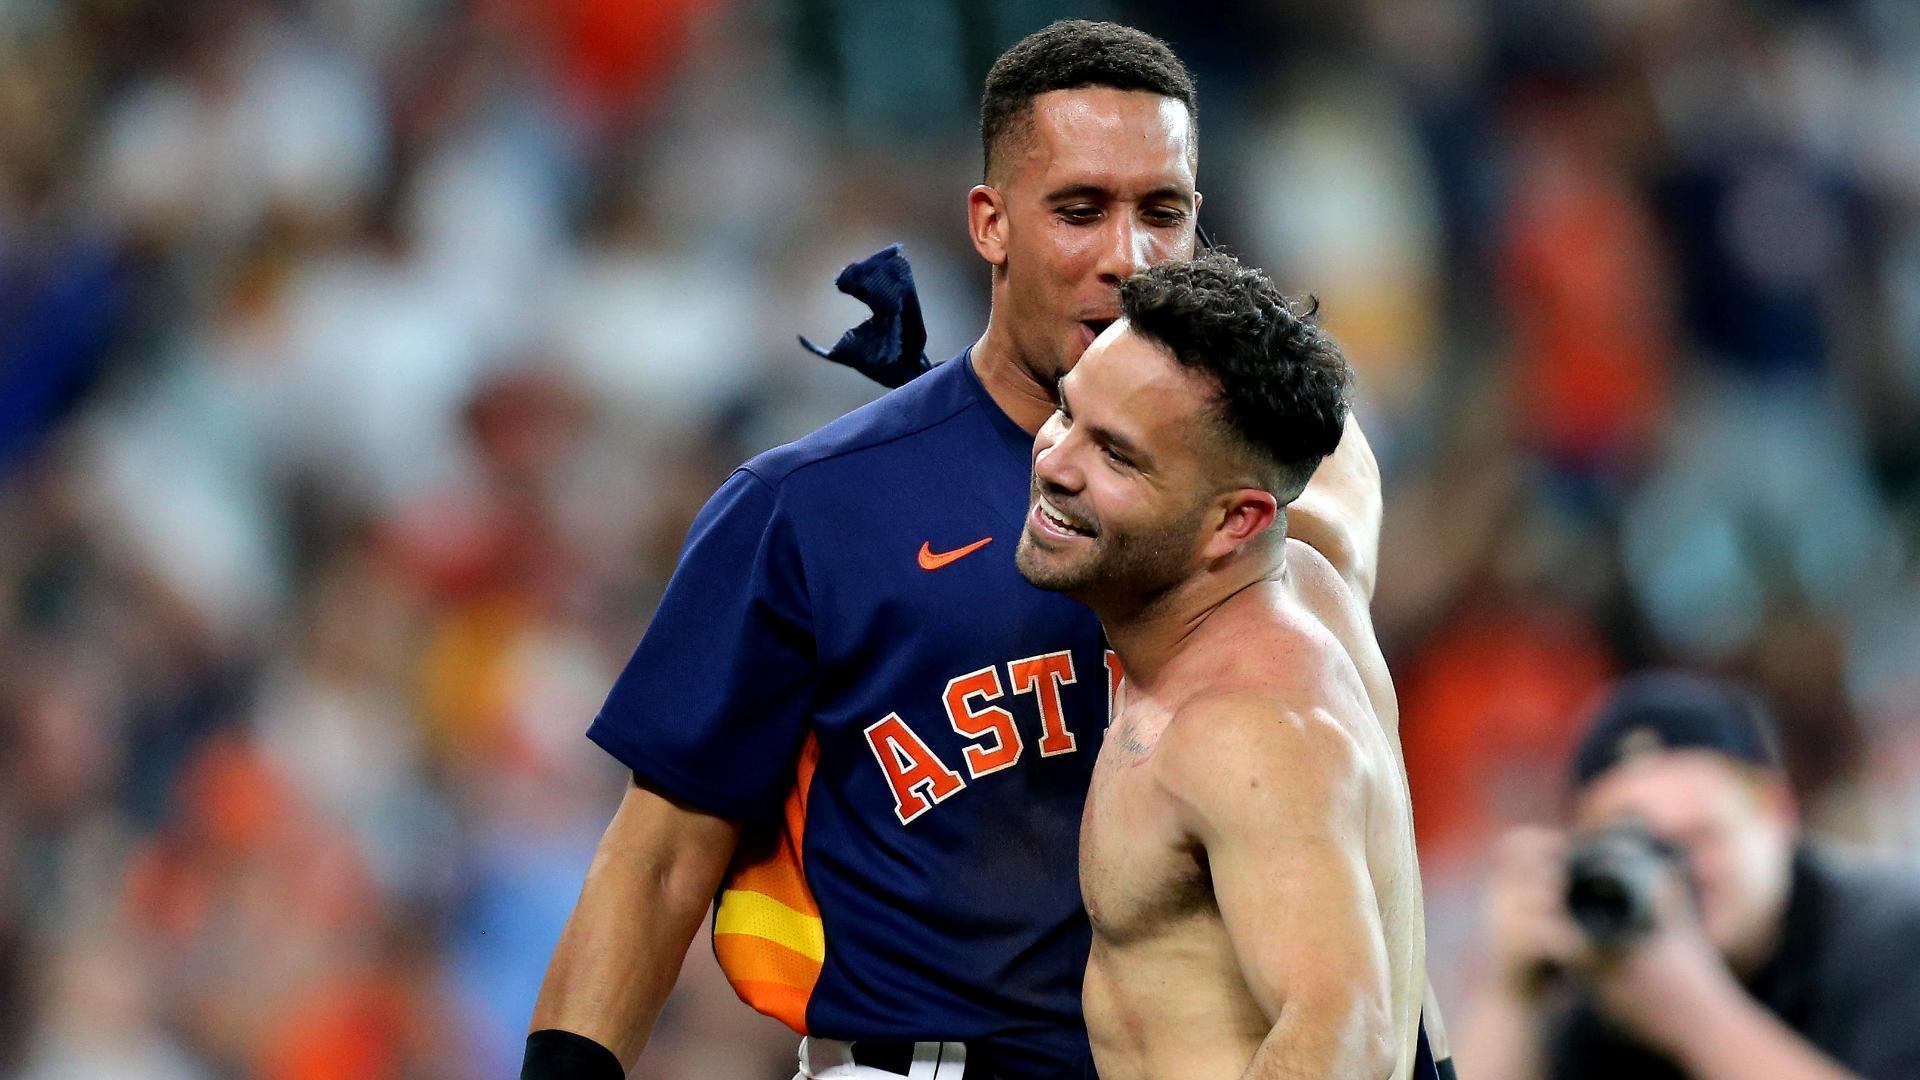 Altuve hits walk-off homer, jersey gets ripped off